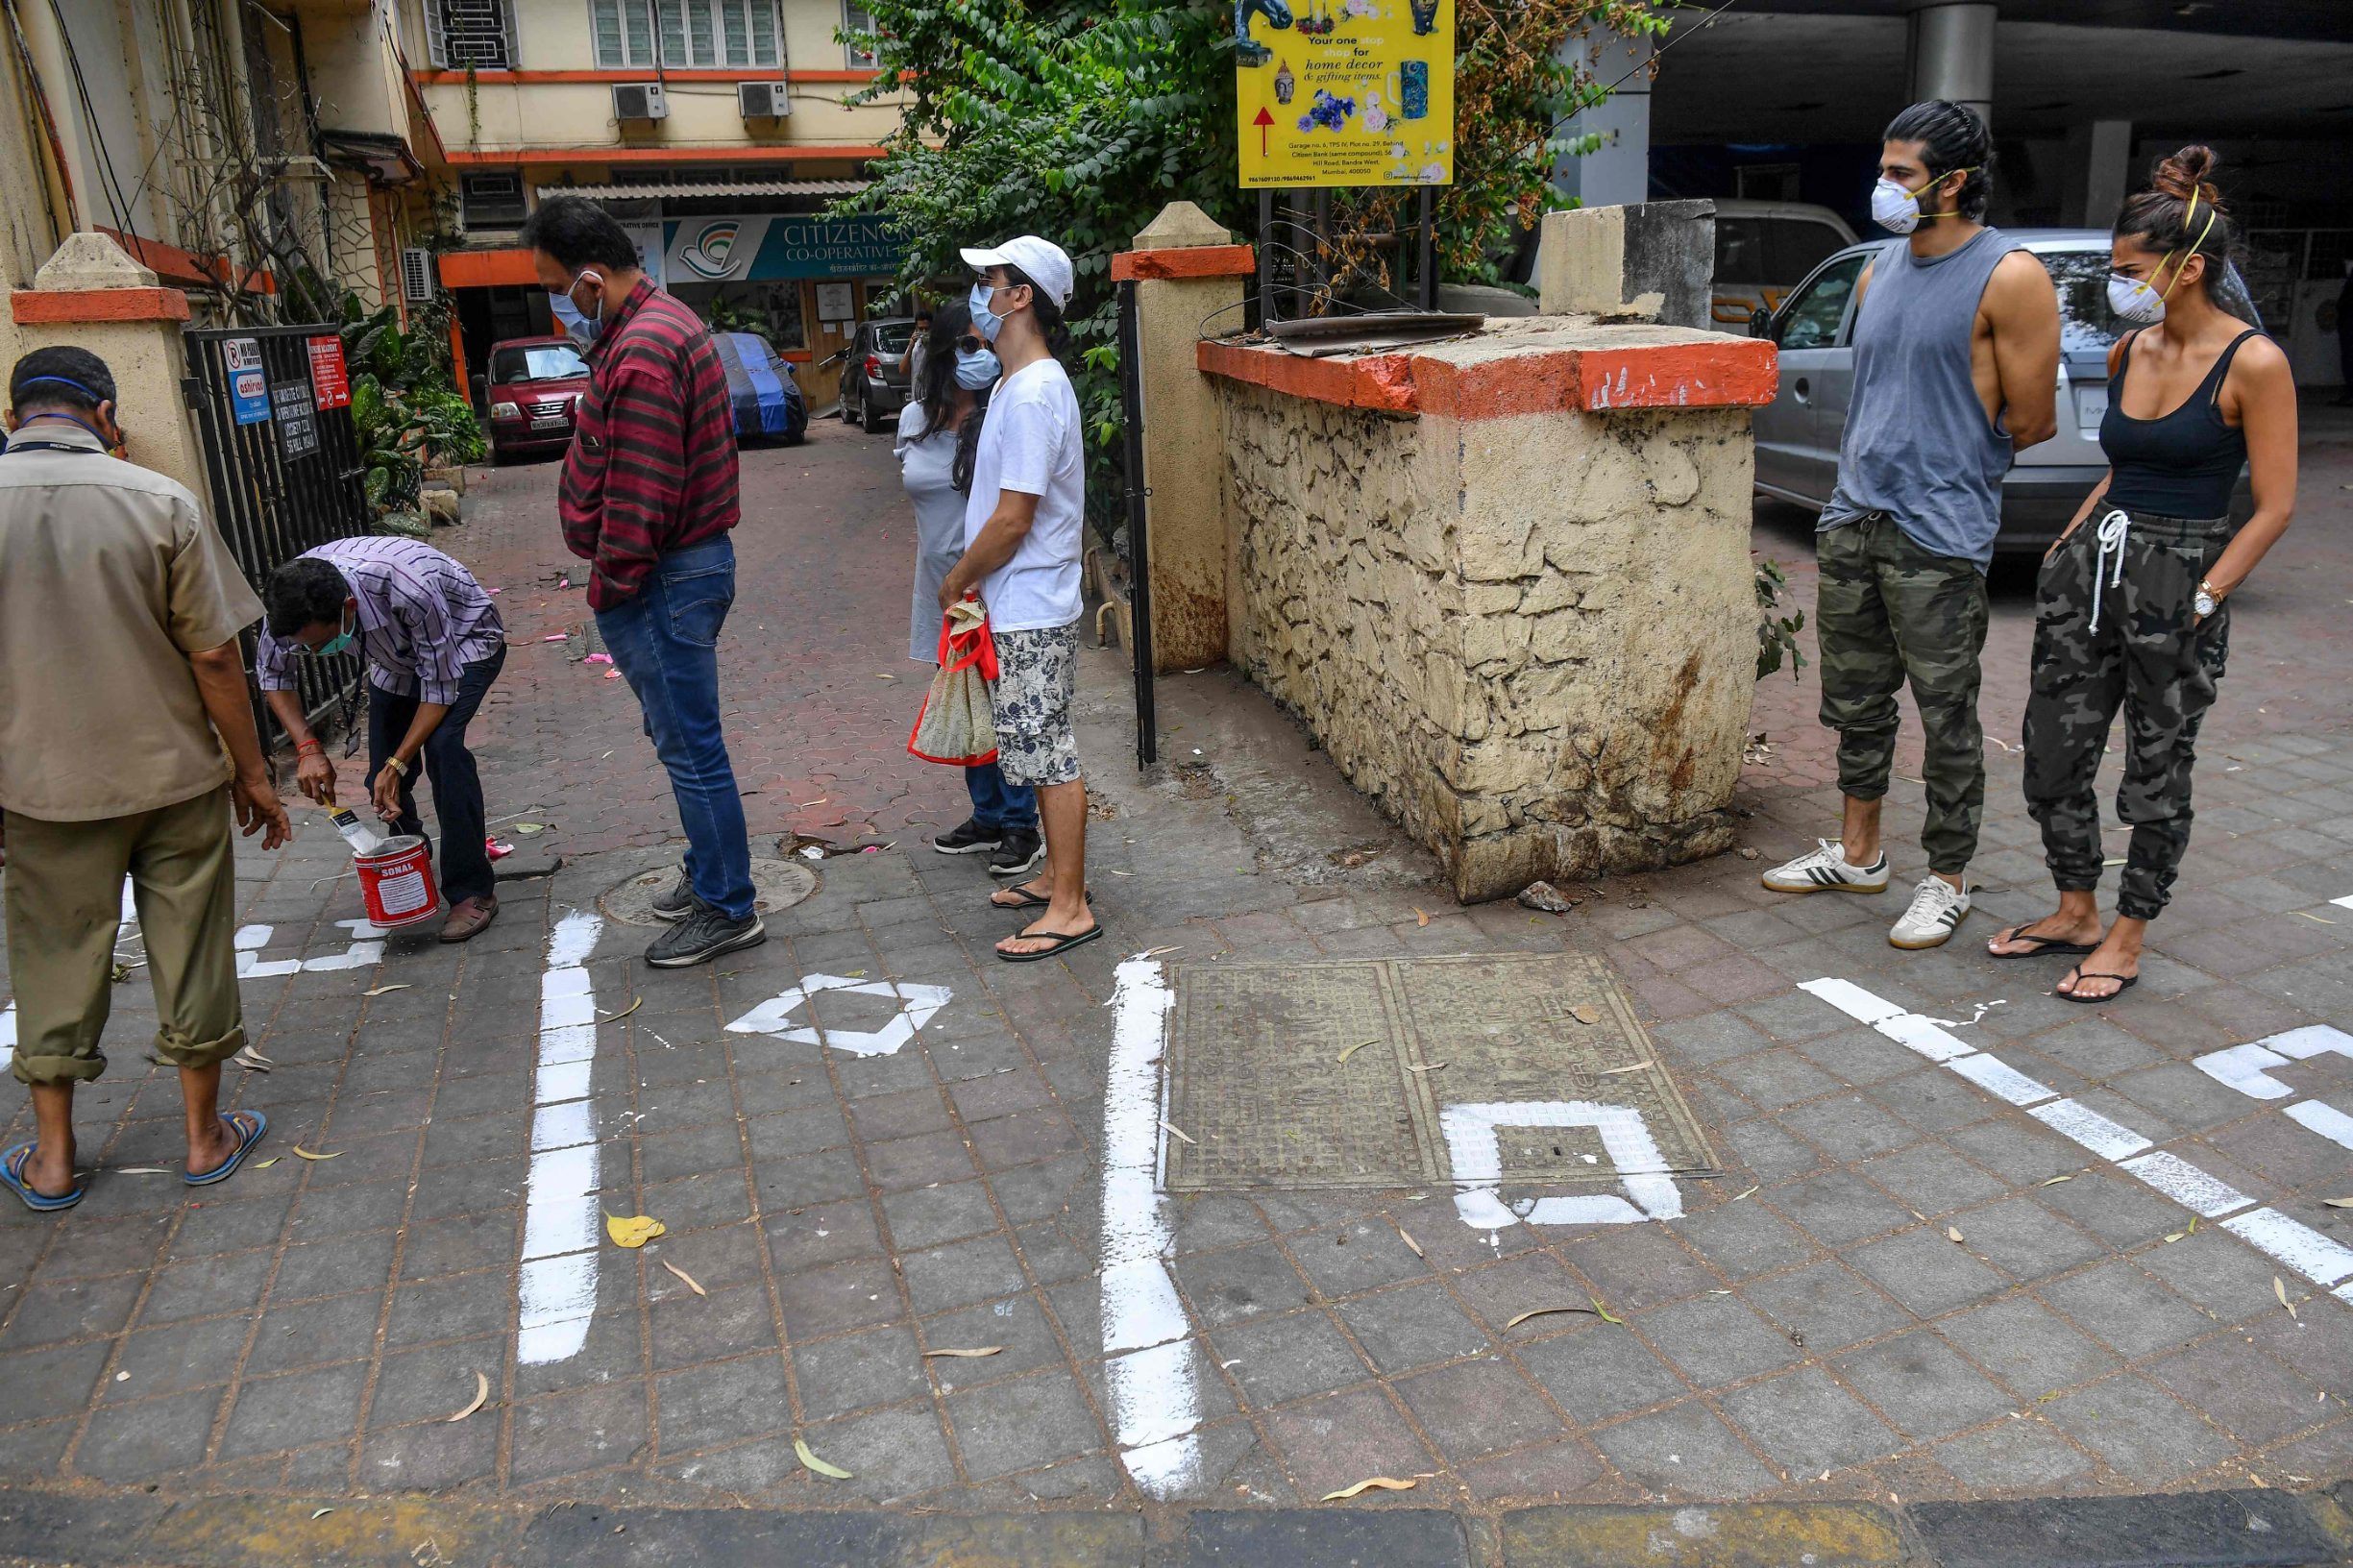 Customers watch municipal workers (L) painting white marks on the floor to help maintaining recommended social distanciation as they queue outside a departmental store during a government-imposed nationwide lockdown as a preventive measure against the COVID-19 coronavirus in Mumbai on March 26, 2020. (Photo by INDRANIL MUKHERJEE / AFP)